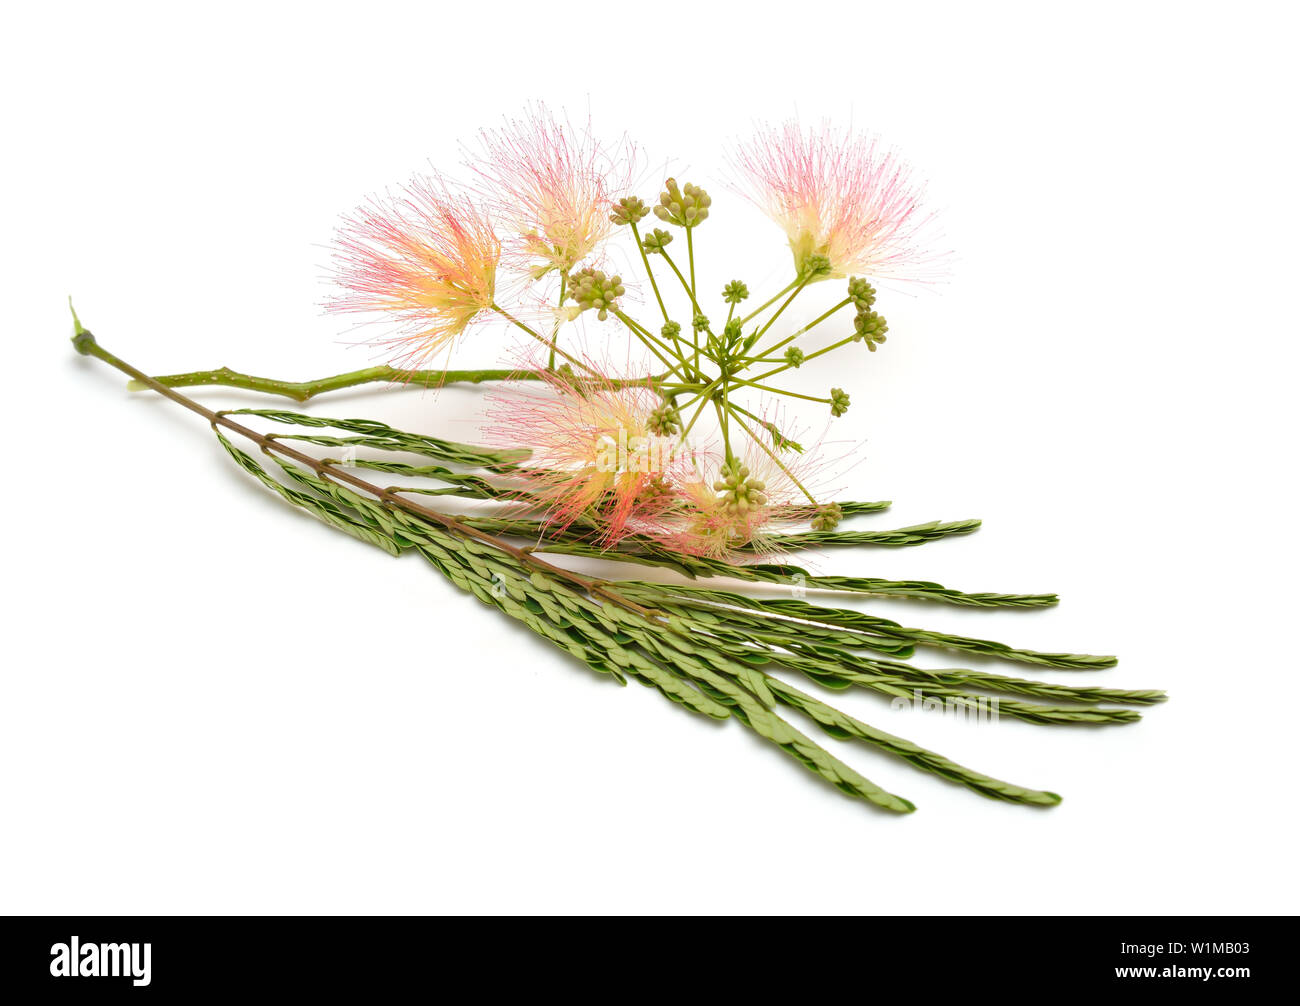 Albizia julibrissin or Persian silk tree, pink silk tree. Isolated on white background. Stock Photo